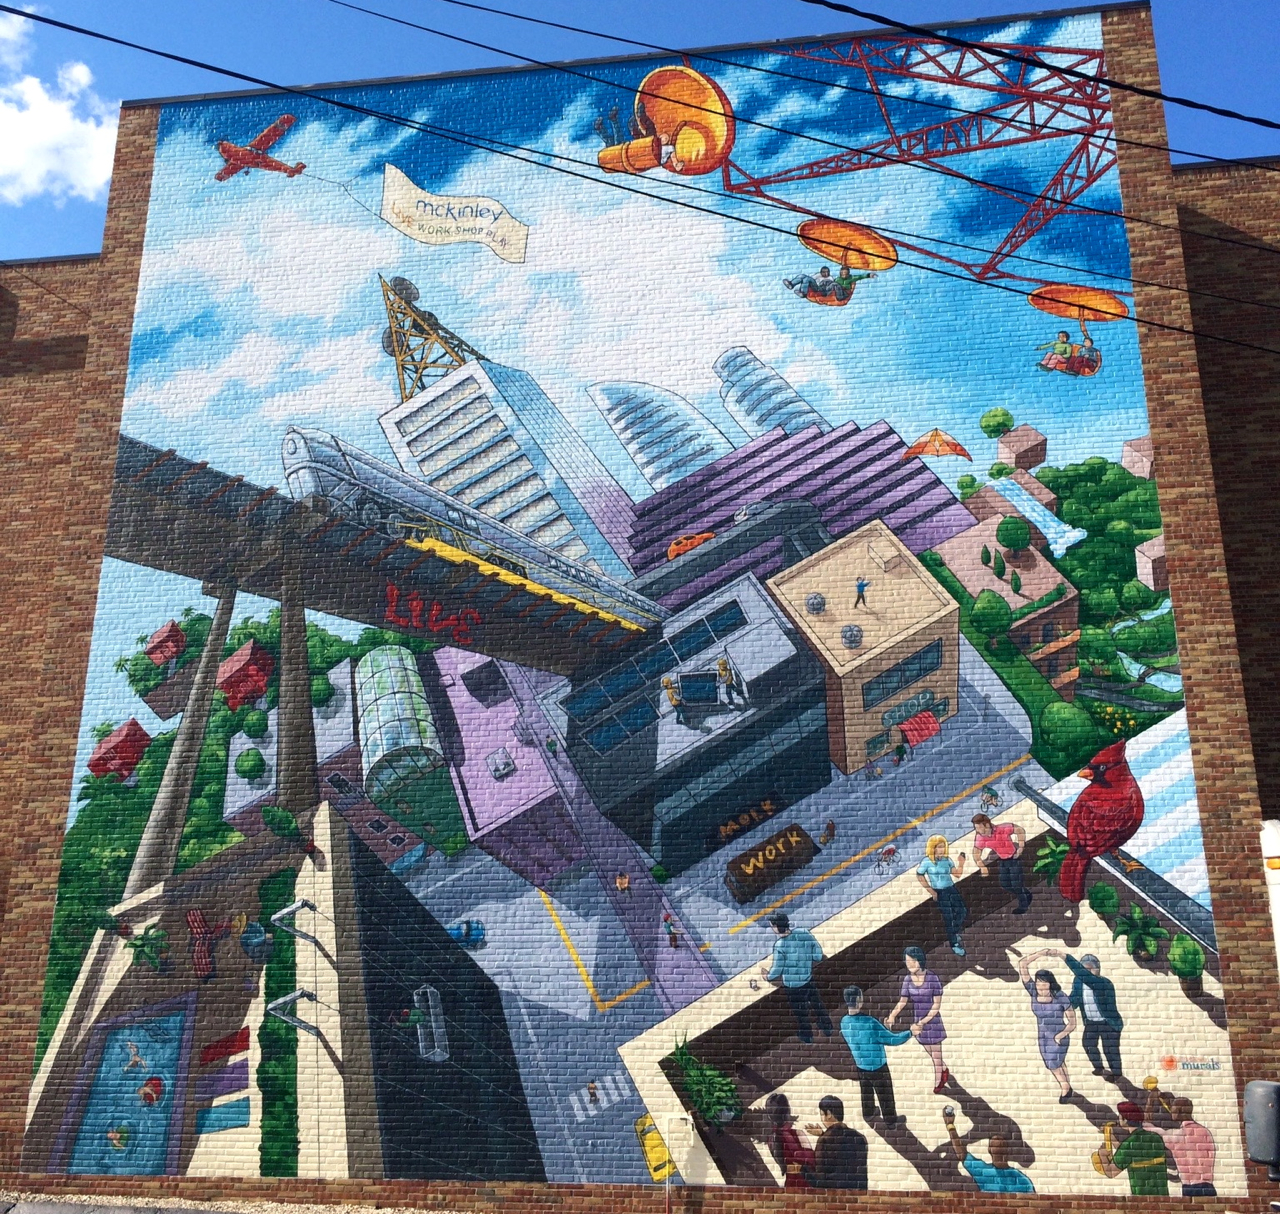 McKinley Mural Project